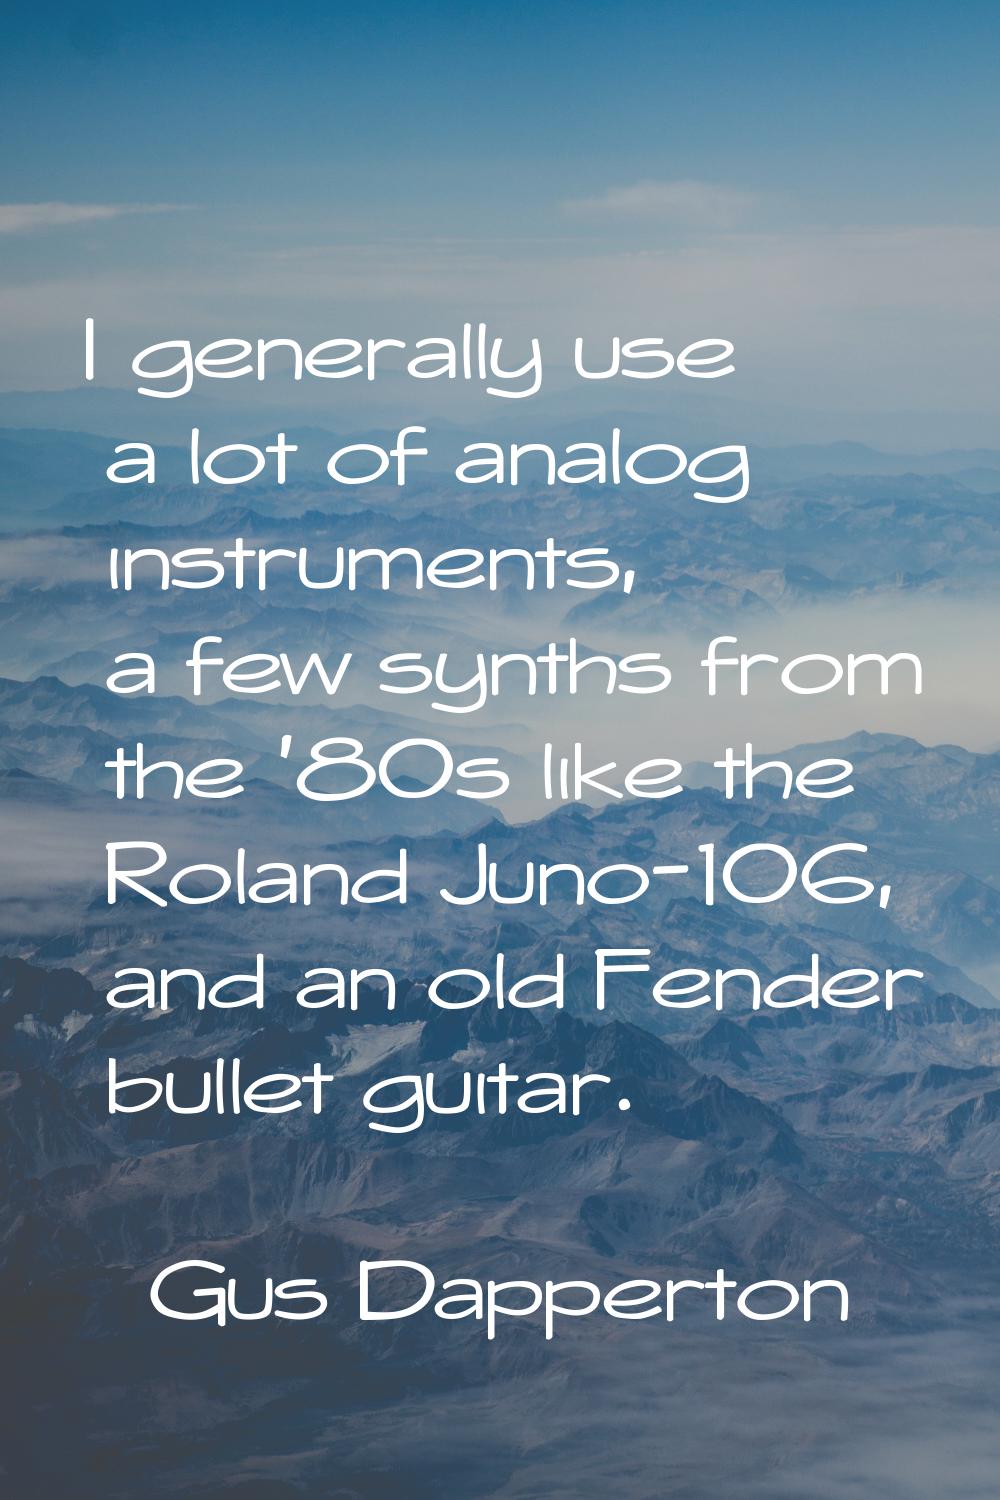 I generally use a lot of analog instruments, a few synths from the '80s like the Roland Juno-106, a